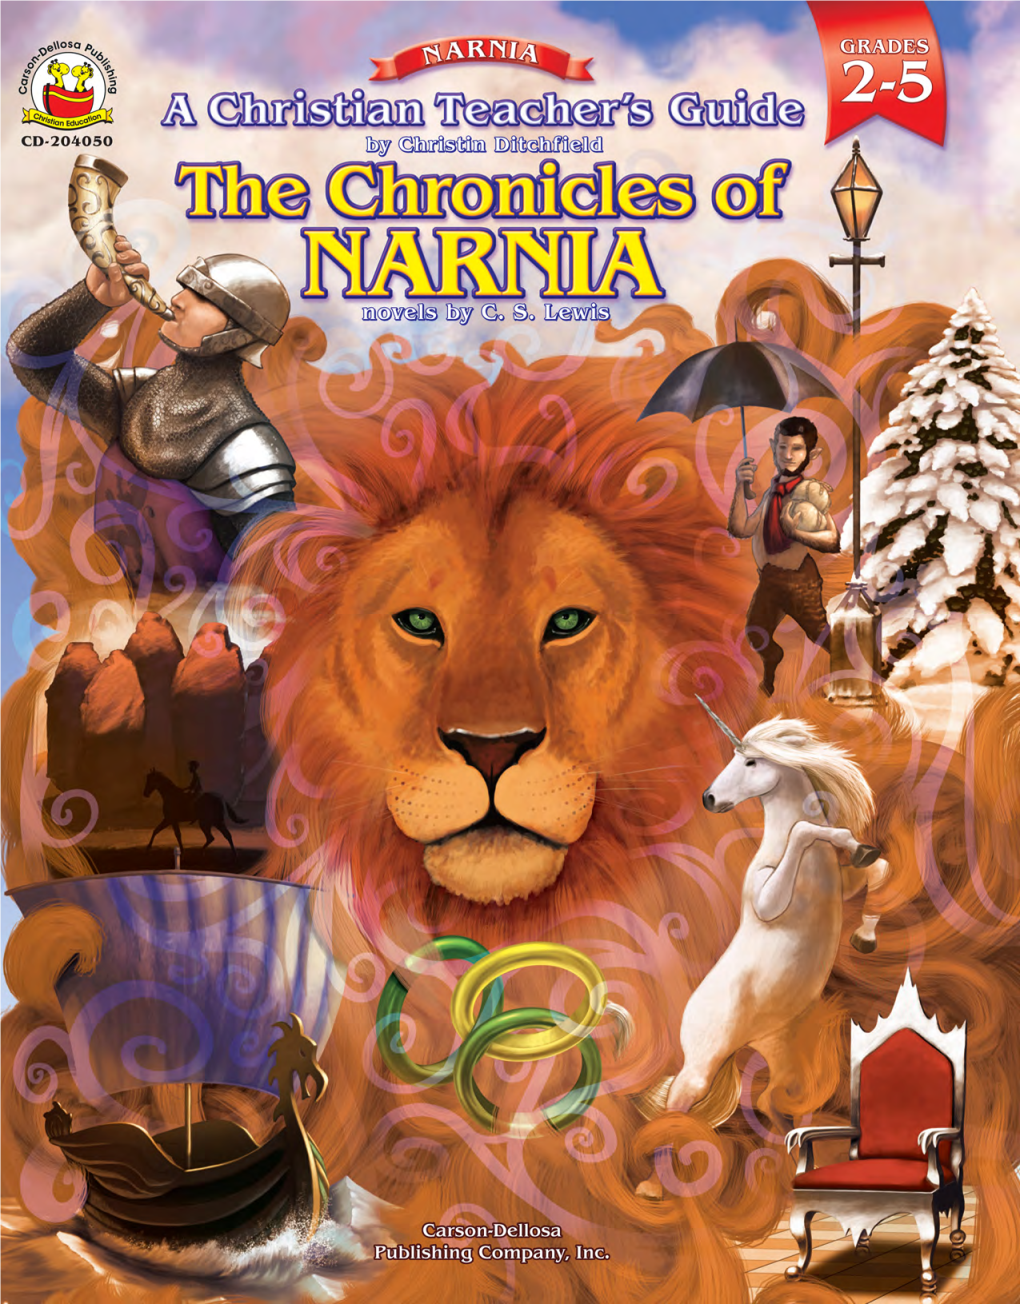 An Introduction to the Chronicles of Narnia